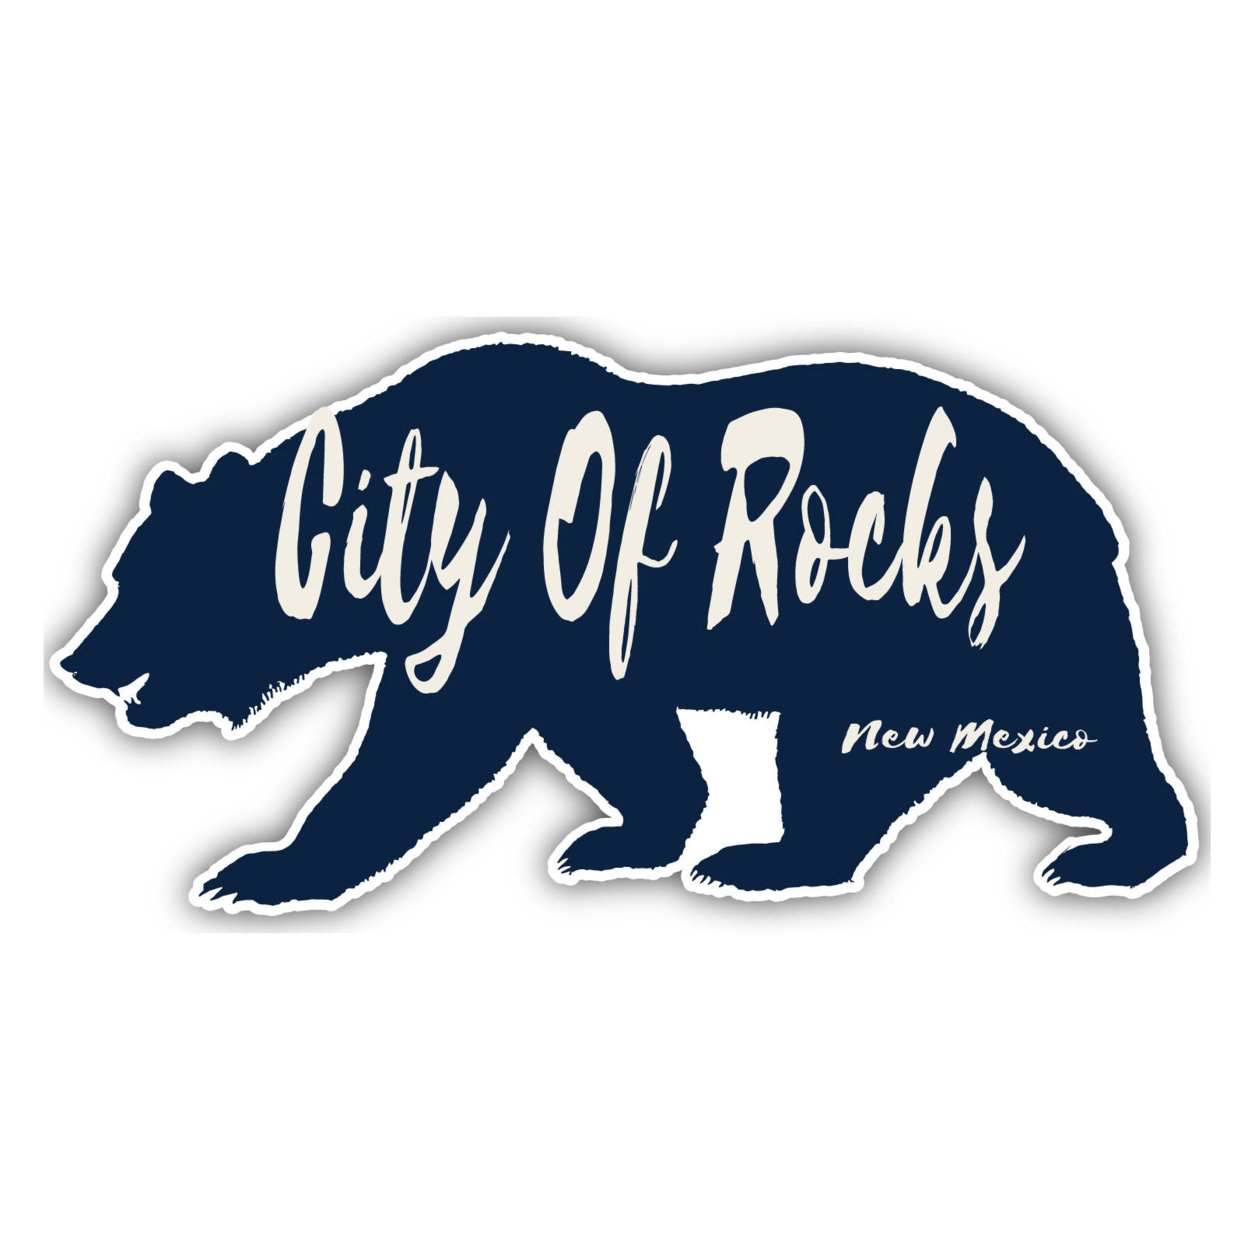 City Of Rocks New Mexico Souvenir Decorative Stickers (Choose Theme And Size) - 4-Pack, 6-Inch, Bear